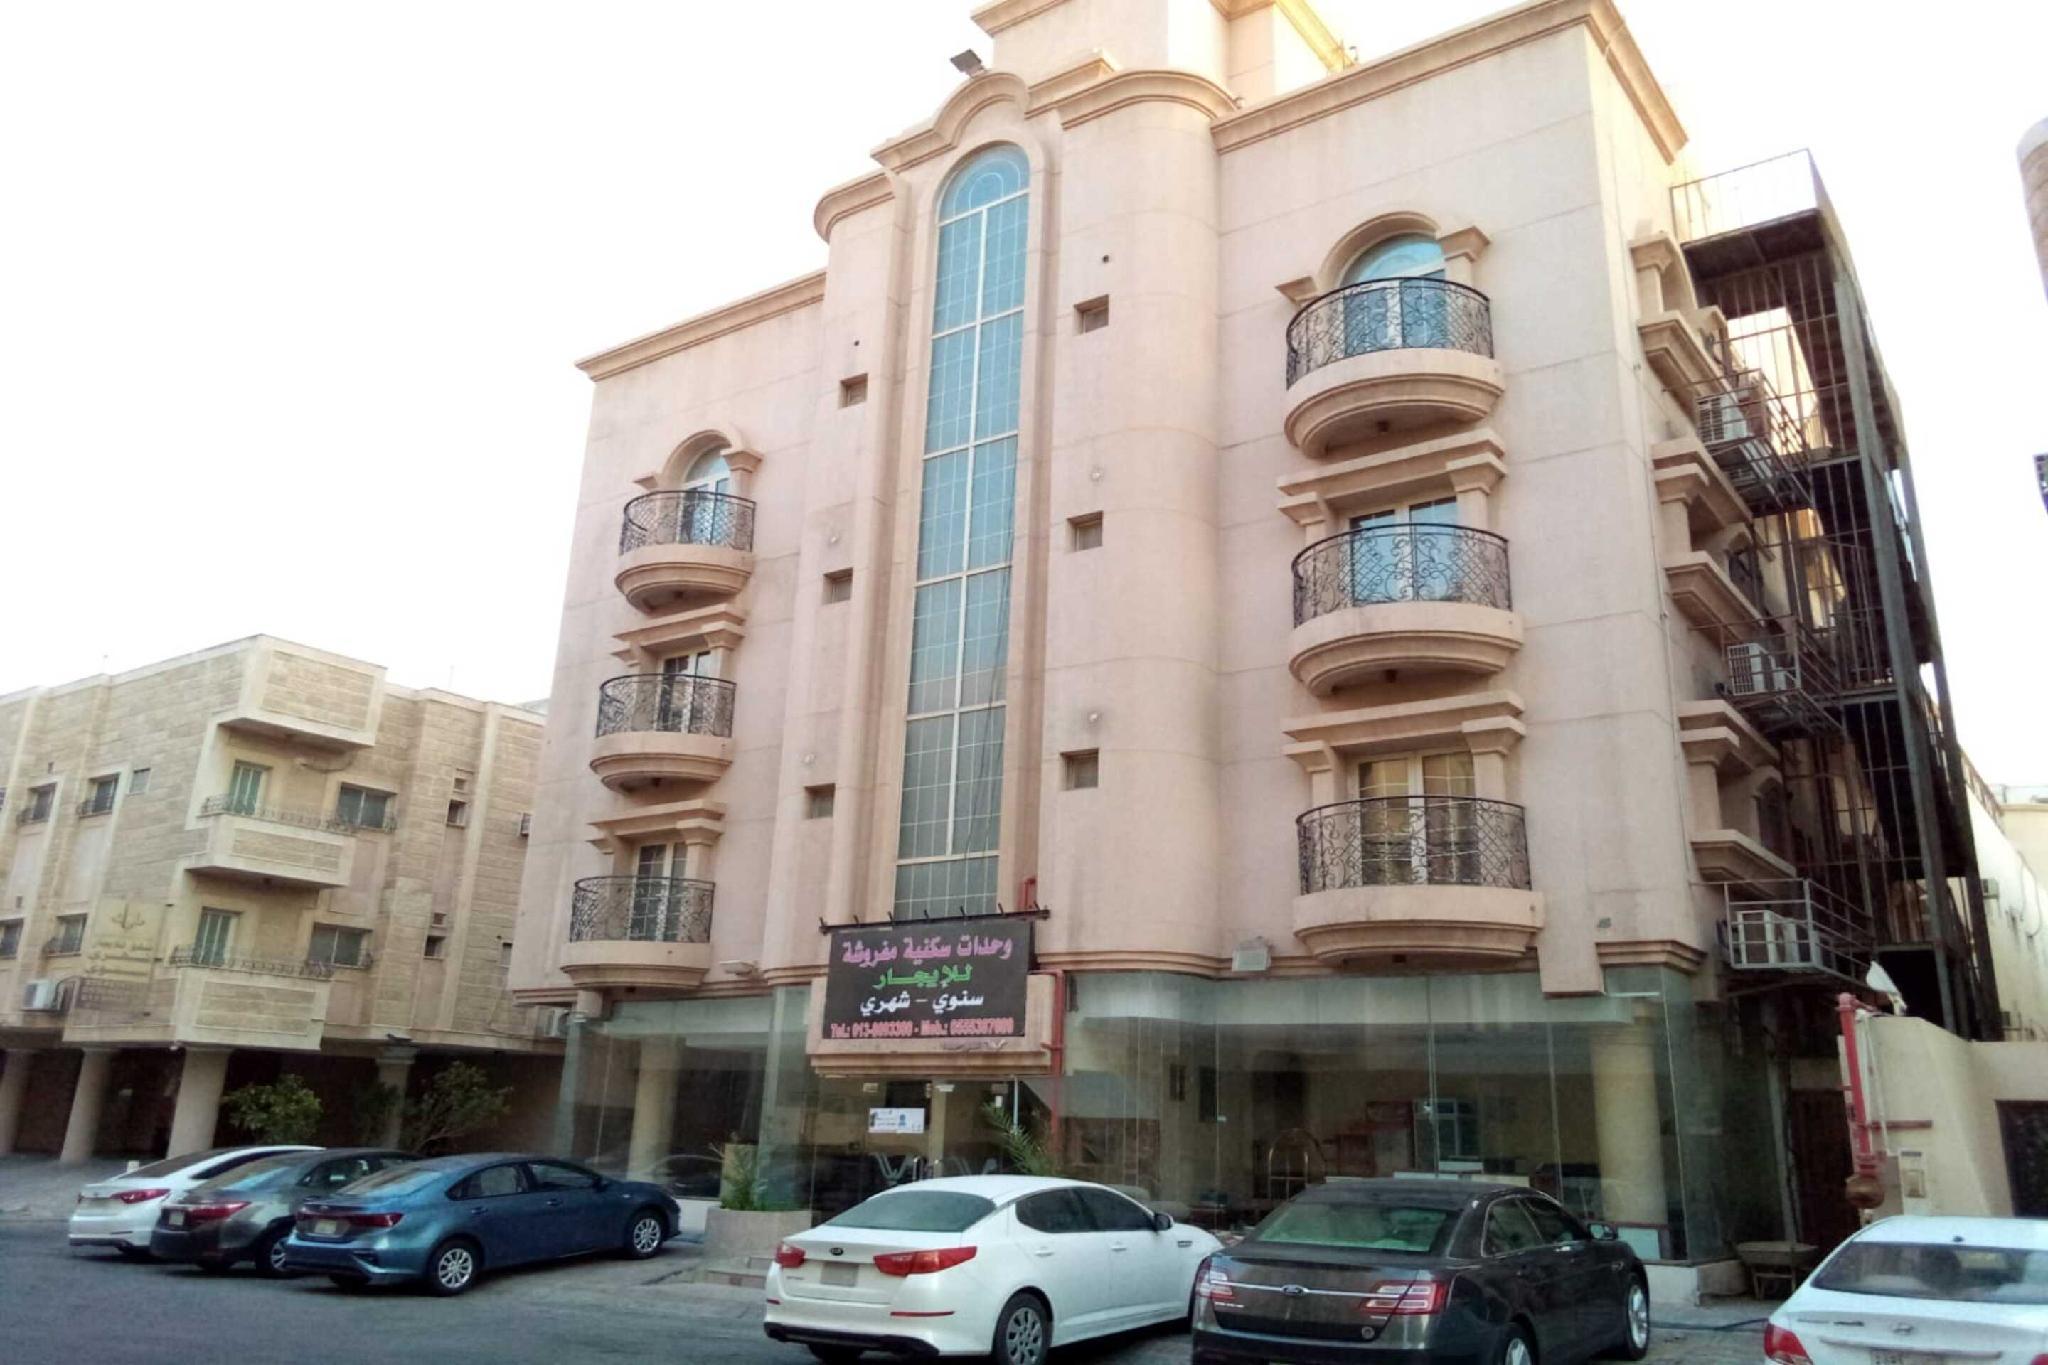 Oyo 640 Home Furnished 3-bedroom Apartment - Dammam